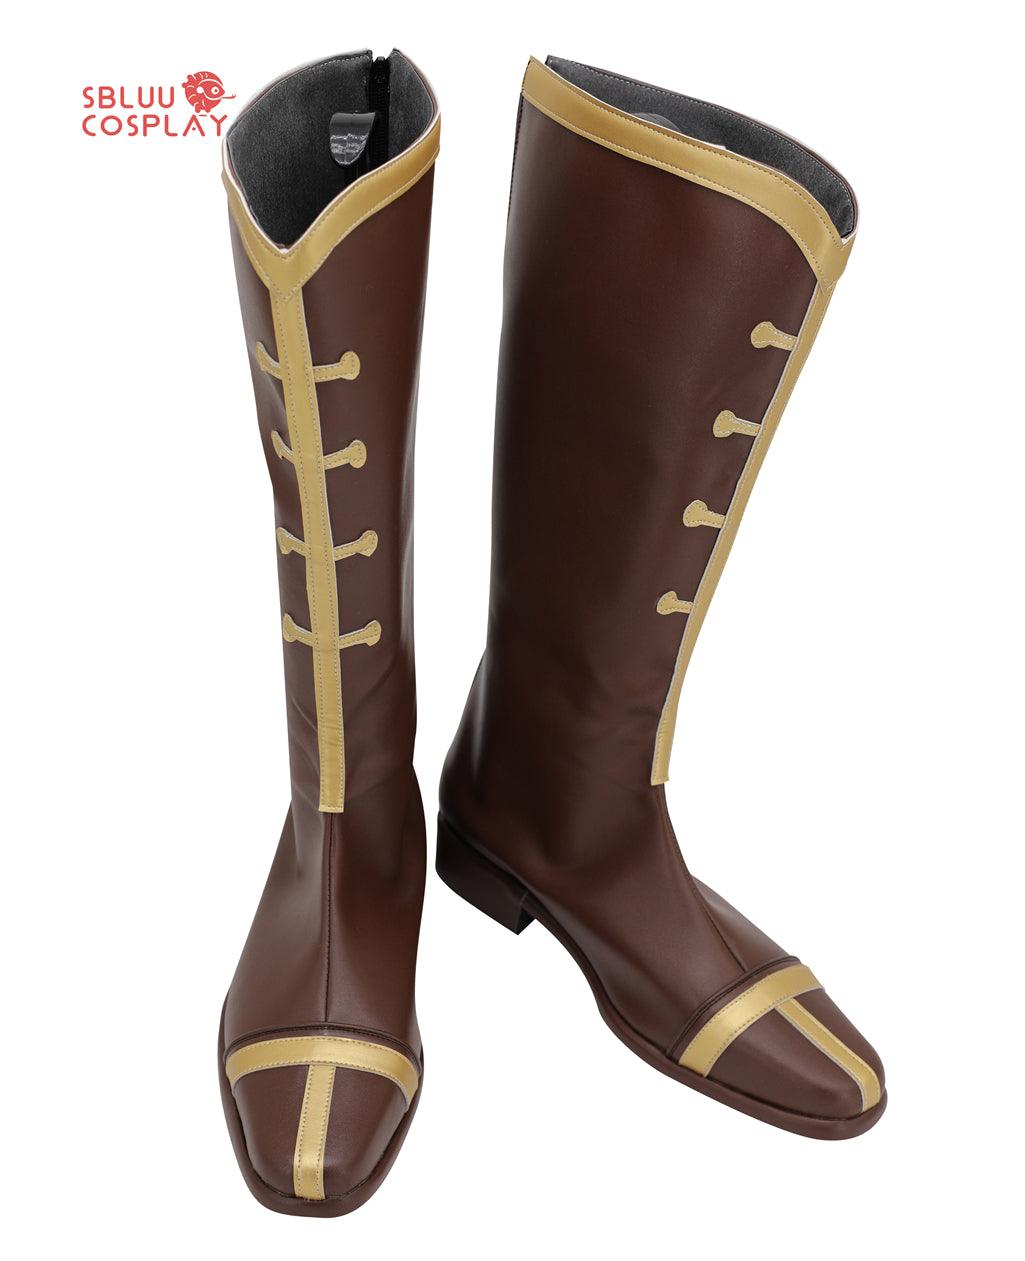 Overlord Mare bello fiore Cosplay Shoes Custom Made Boots - SBluuCosplay